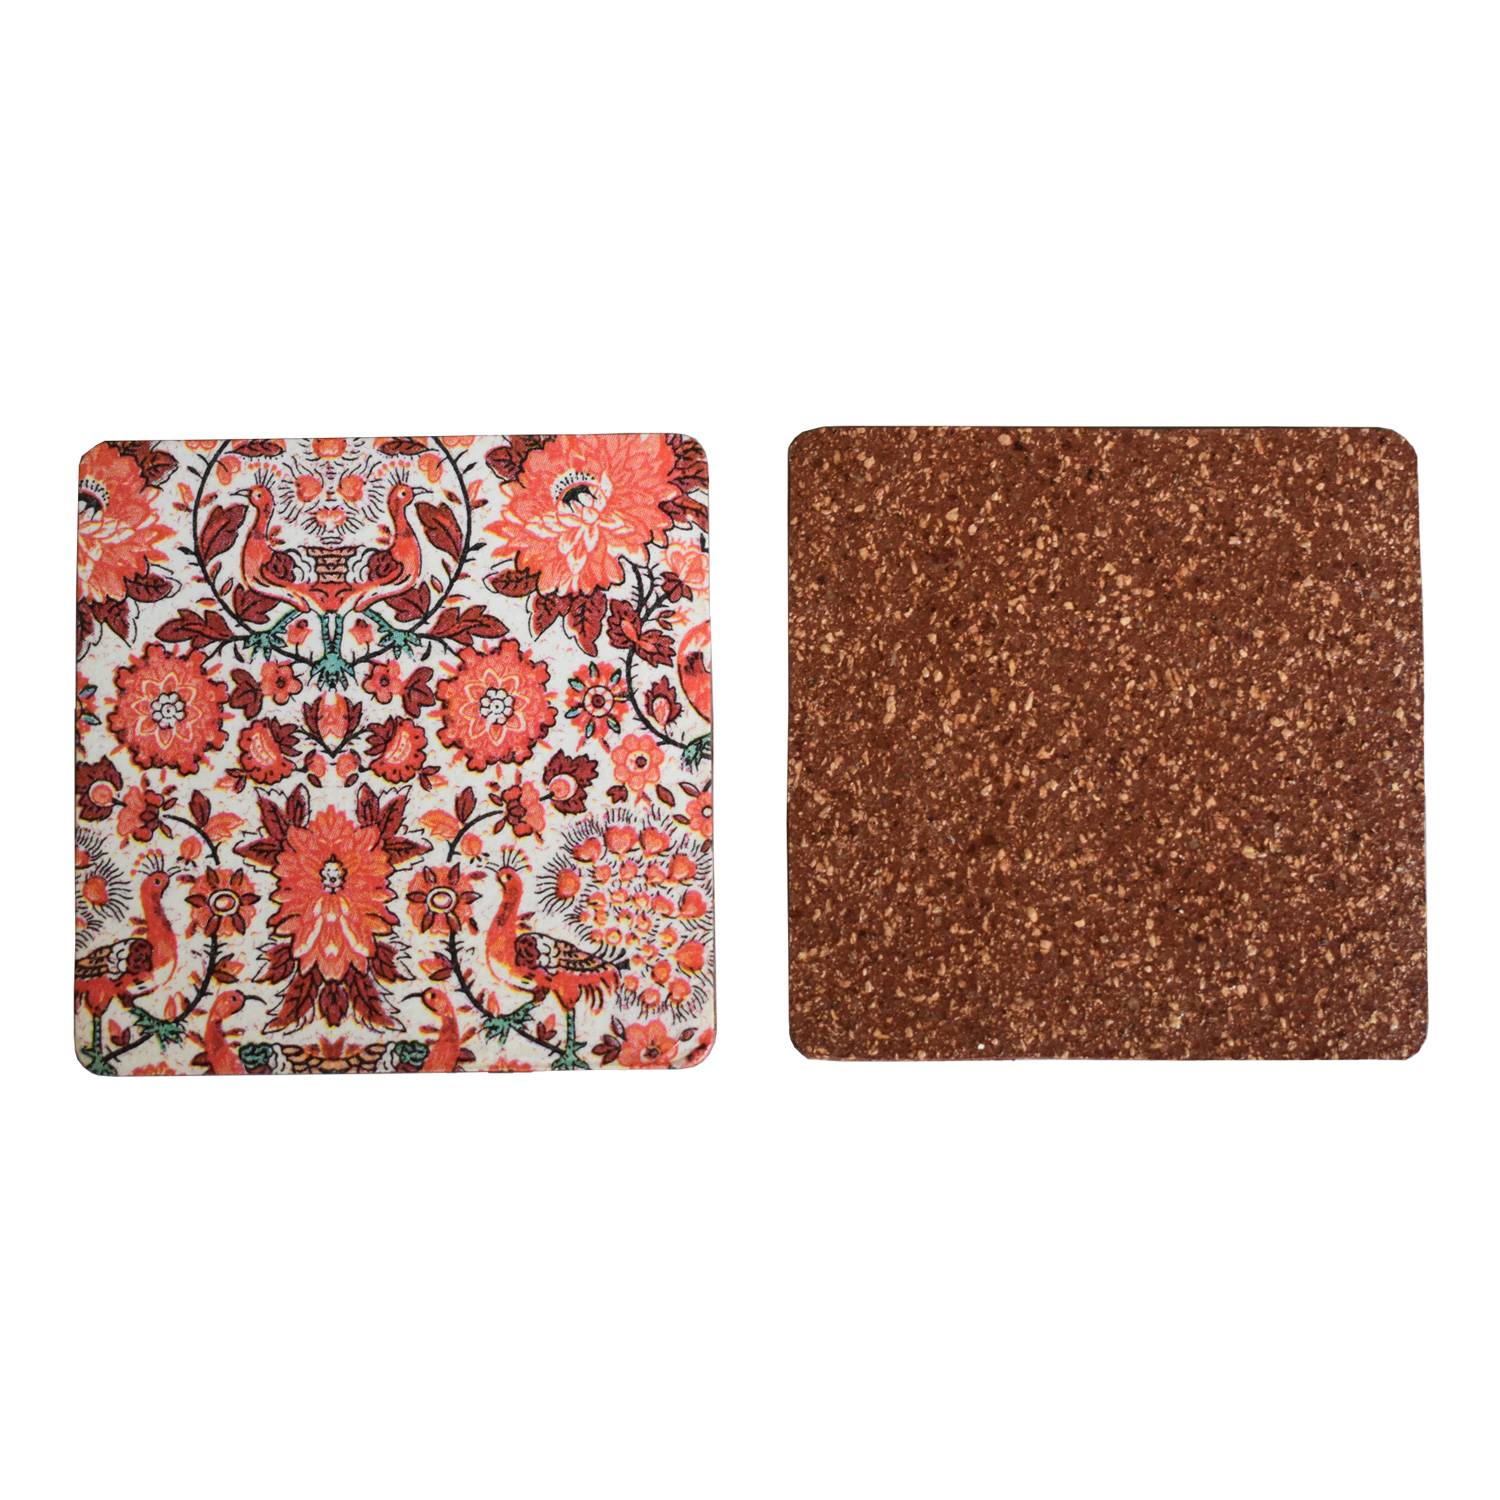 3 Regal Terracotta coasters front and back